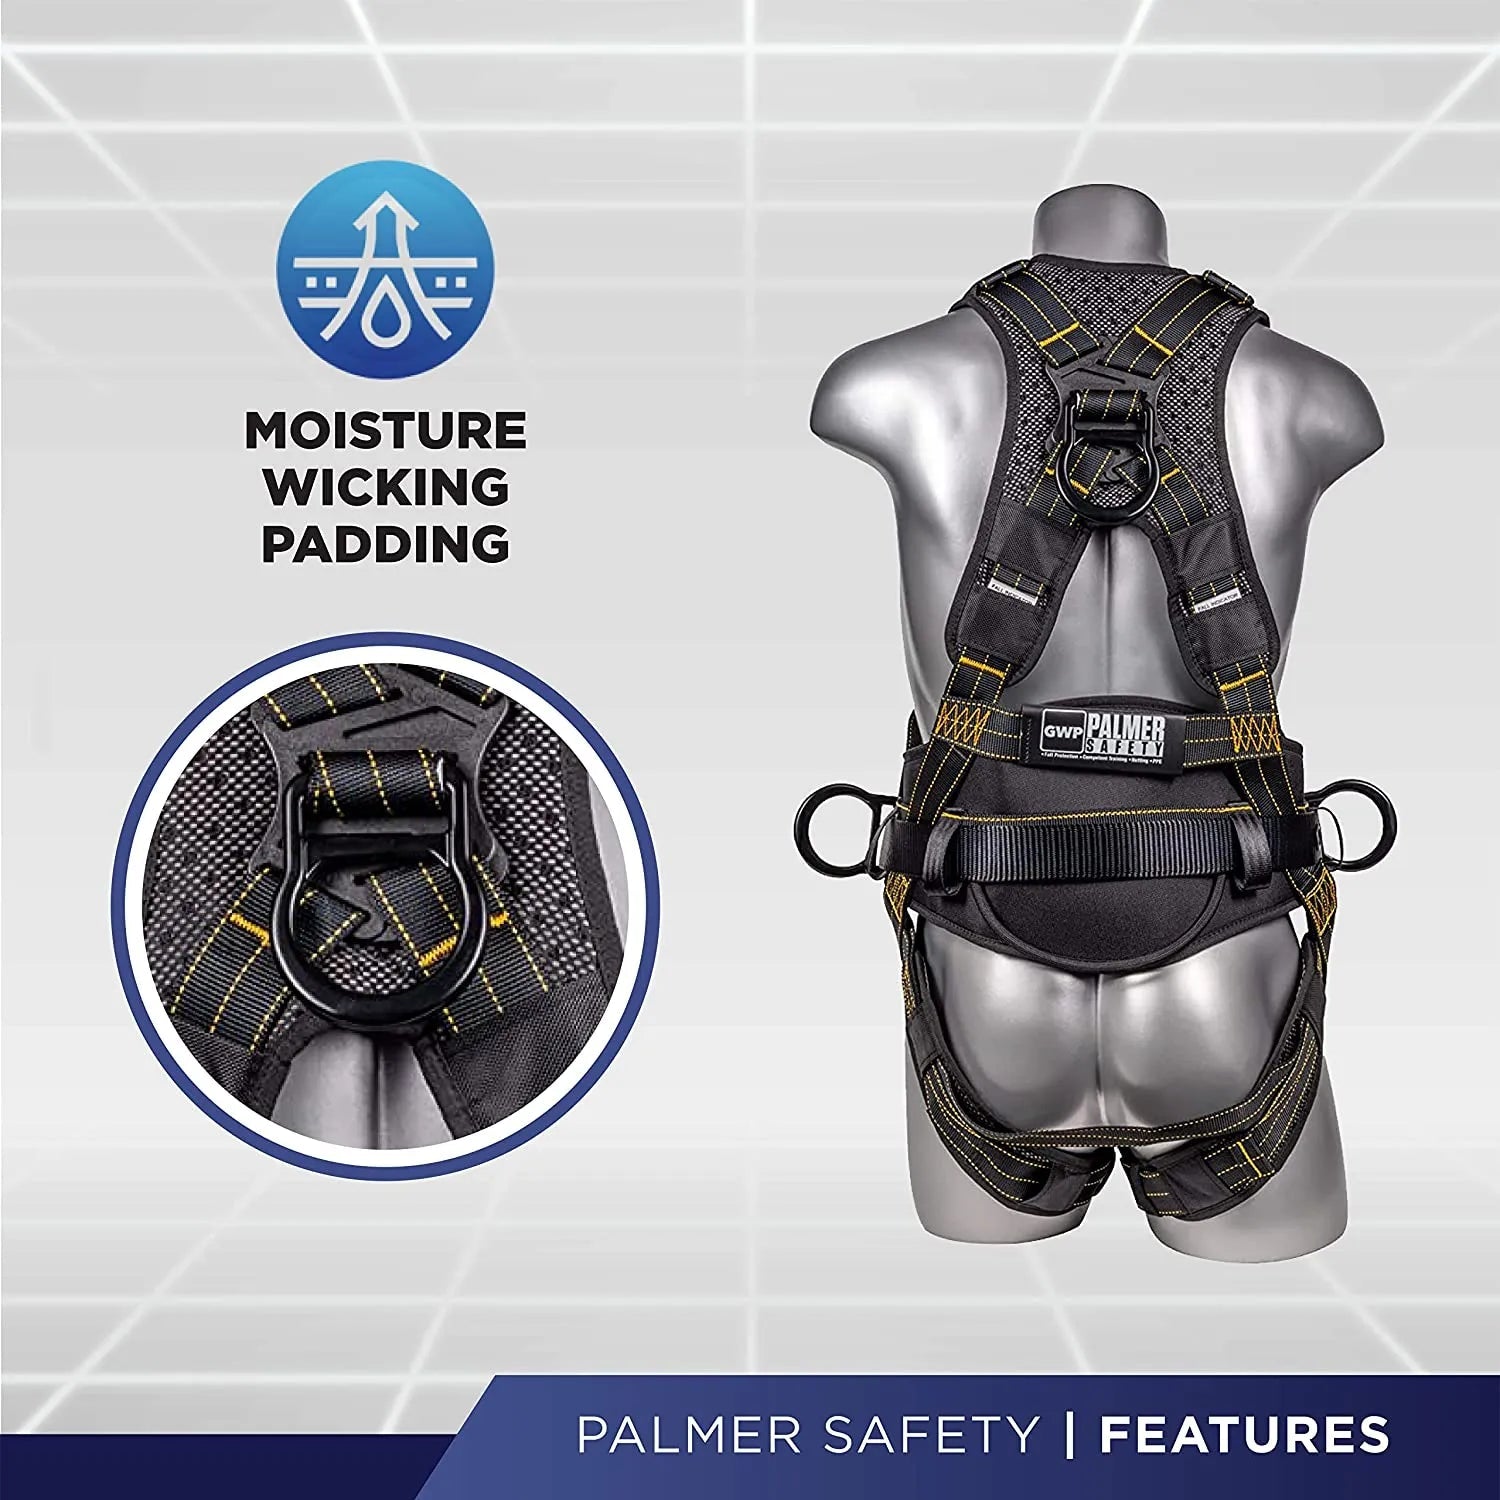 Palmer Safety Hammerhead Safety Harness, Padded Back Support, QCB, Grommet - 1